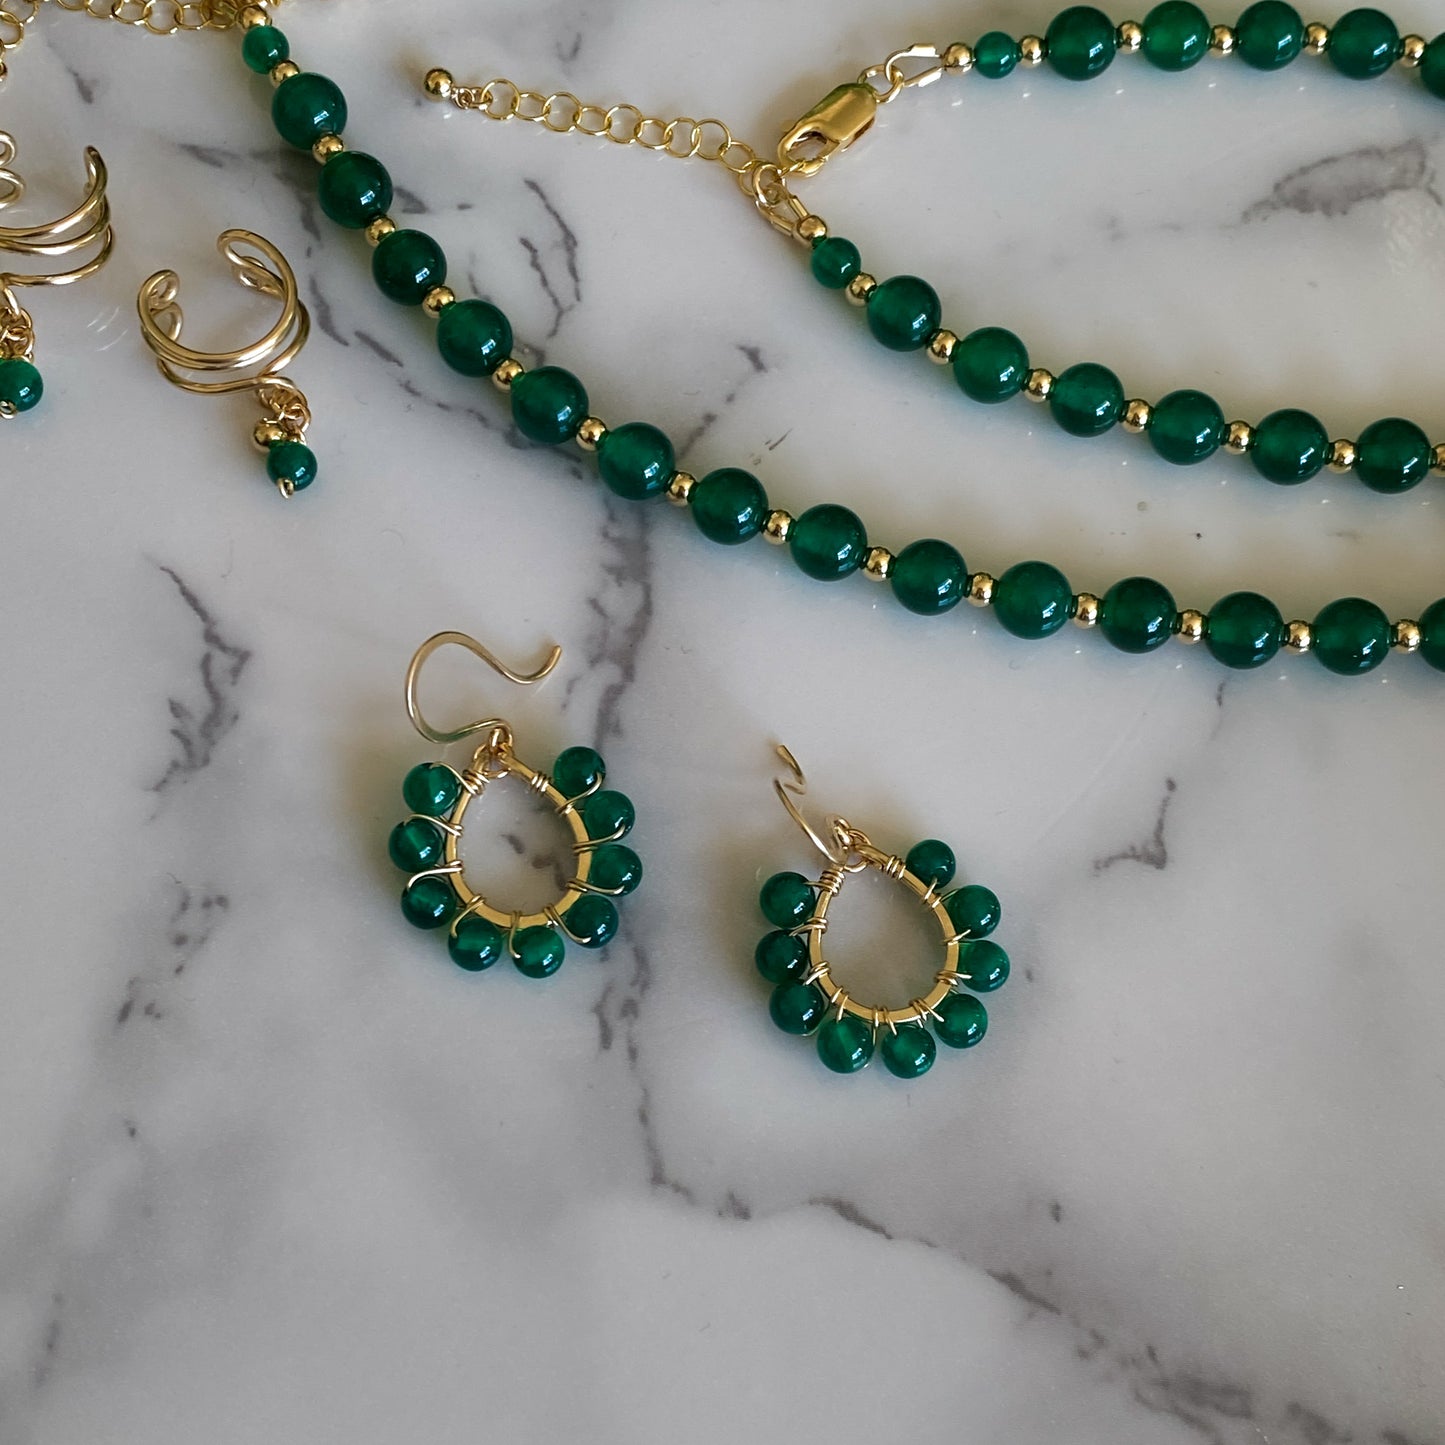 Daphne ~ Green Onyx and 14k Gold Filled Wire Wrapped Earrings